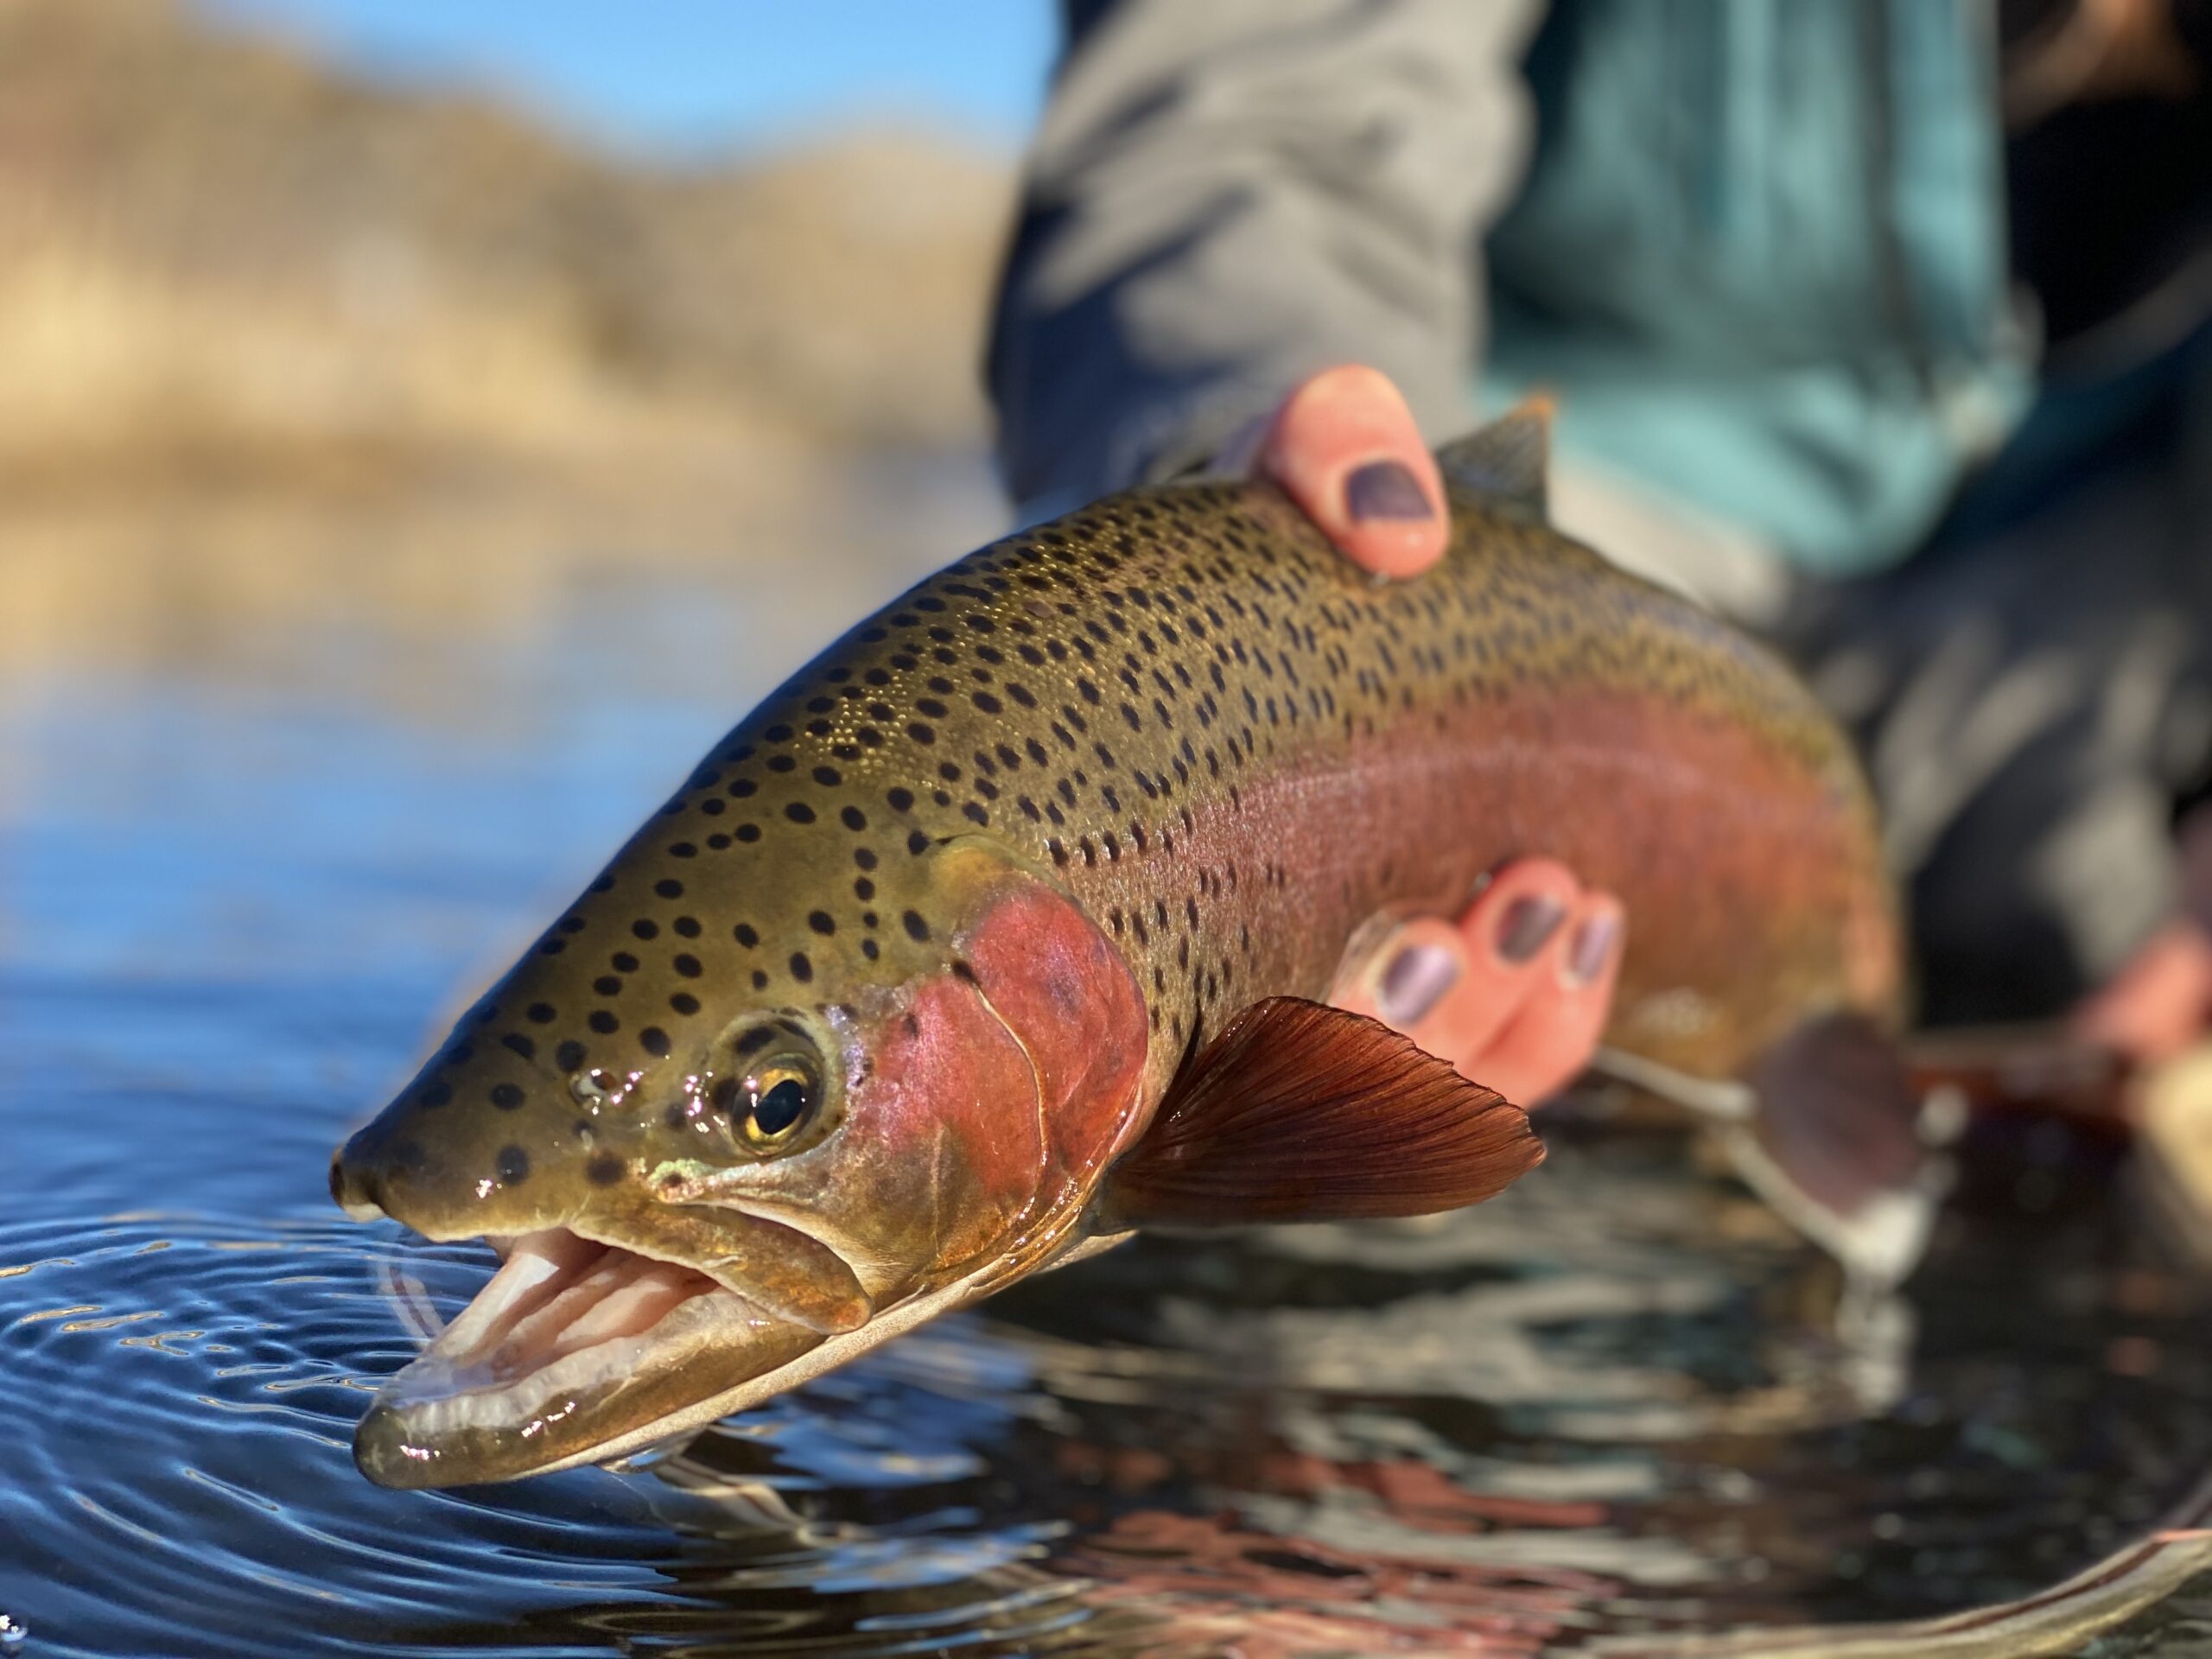 Wyoming Fishing Articles - Trout Ice Fishing Tips. Techniques from